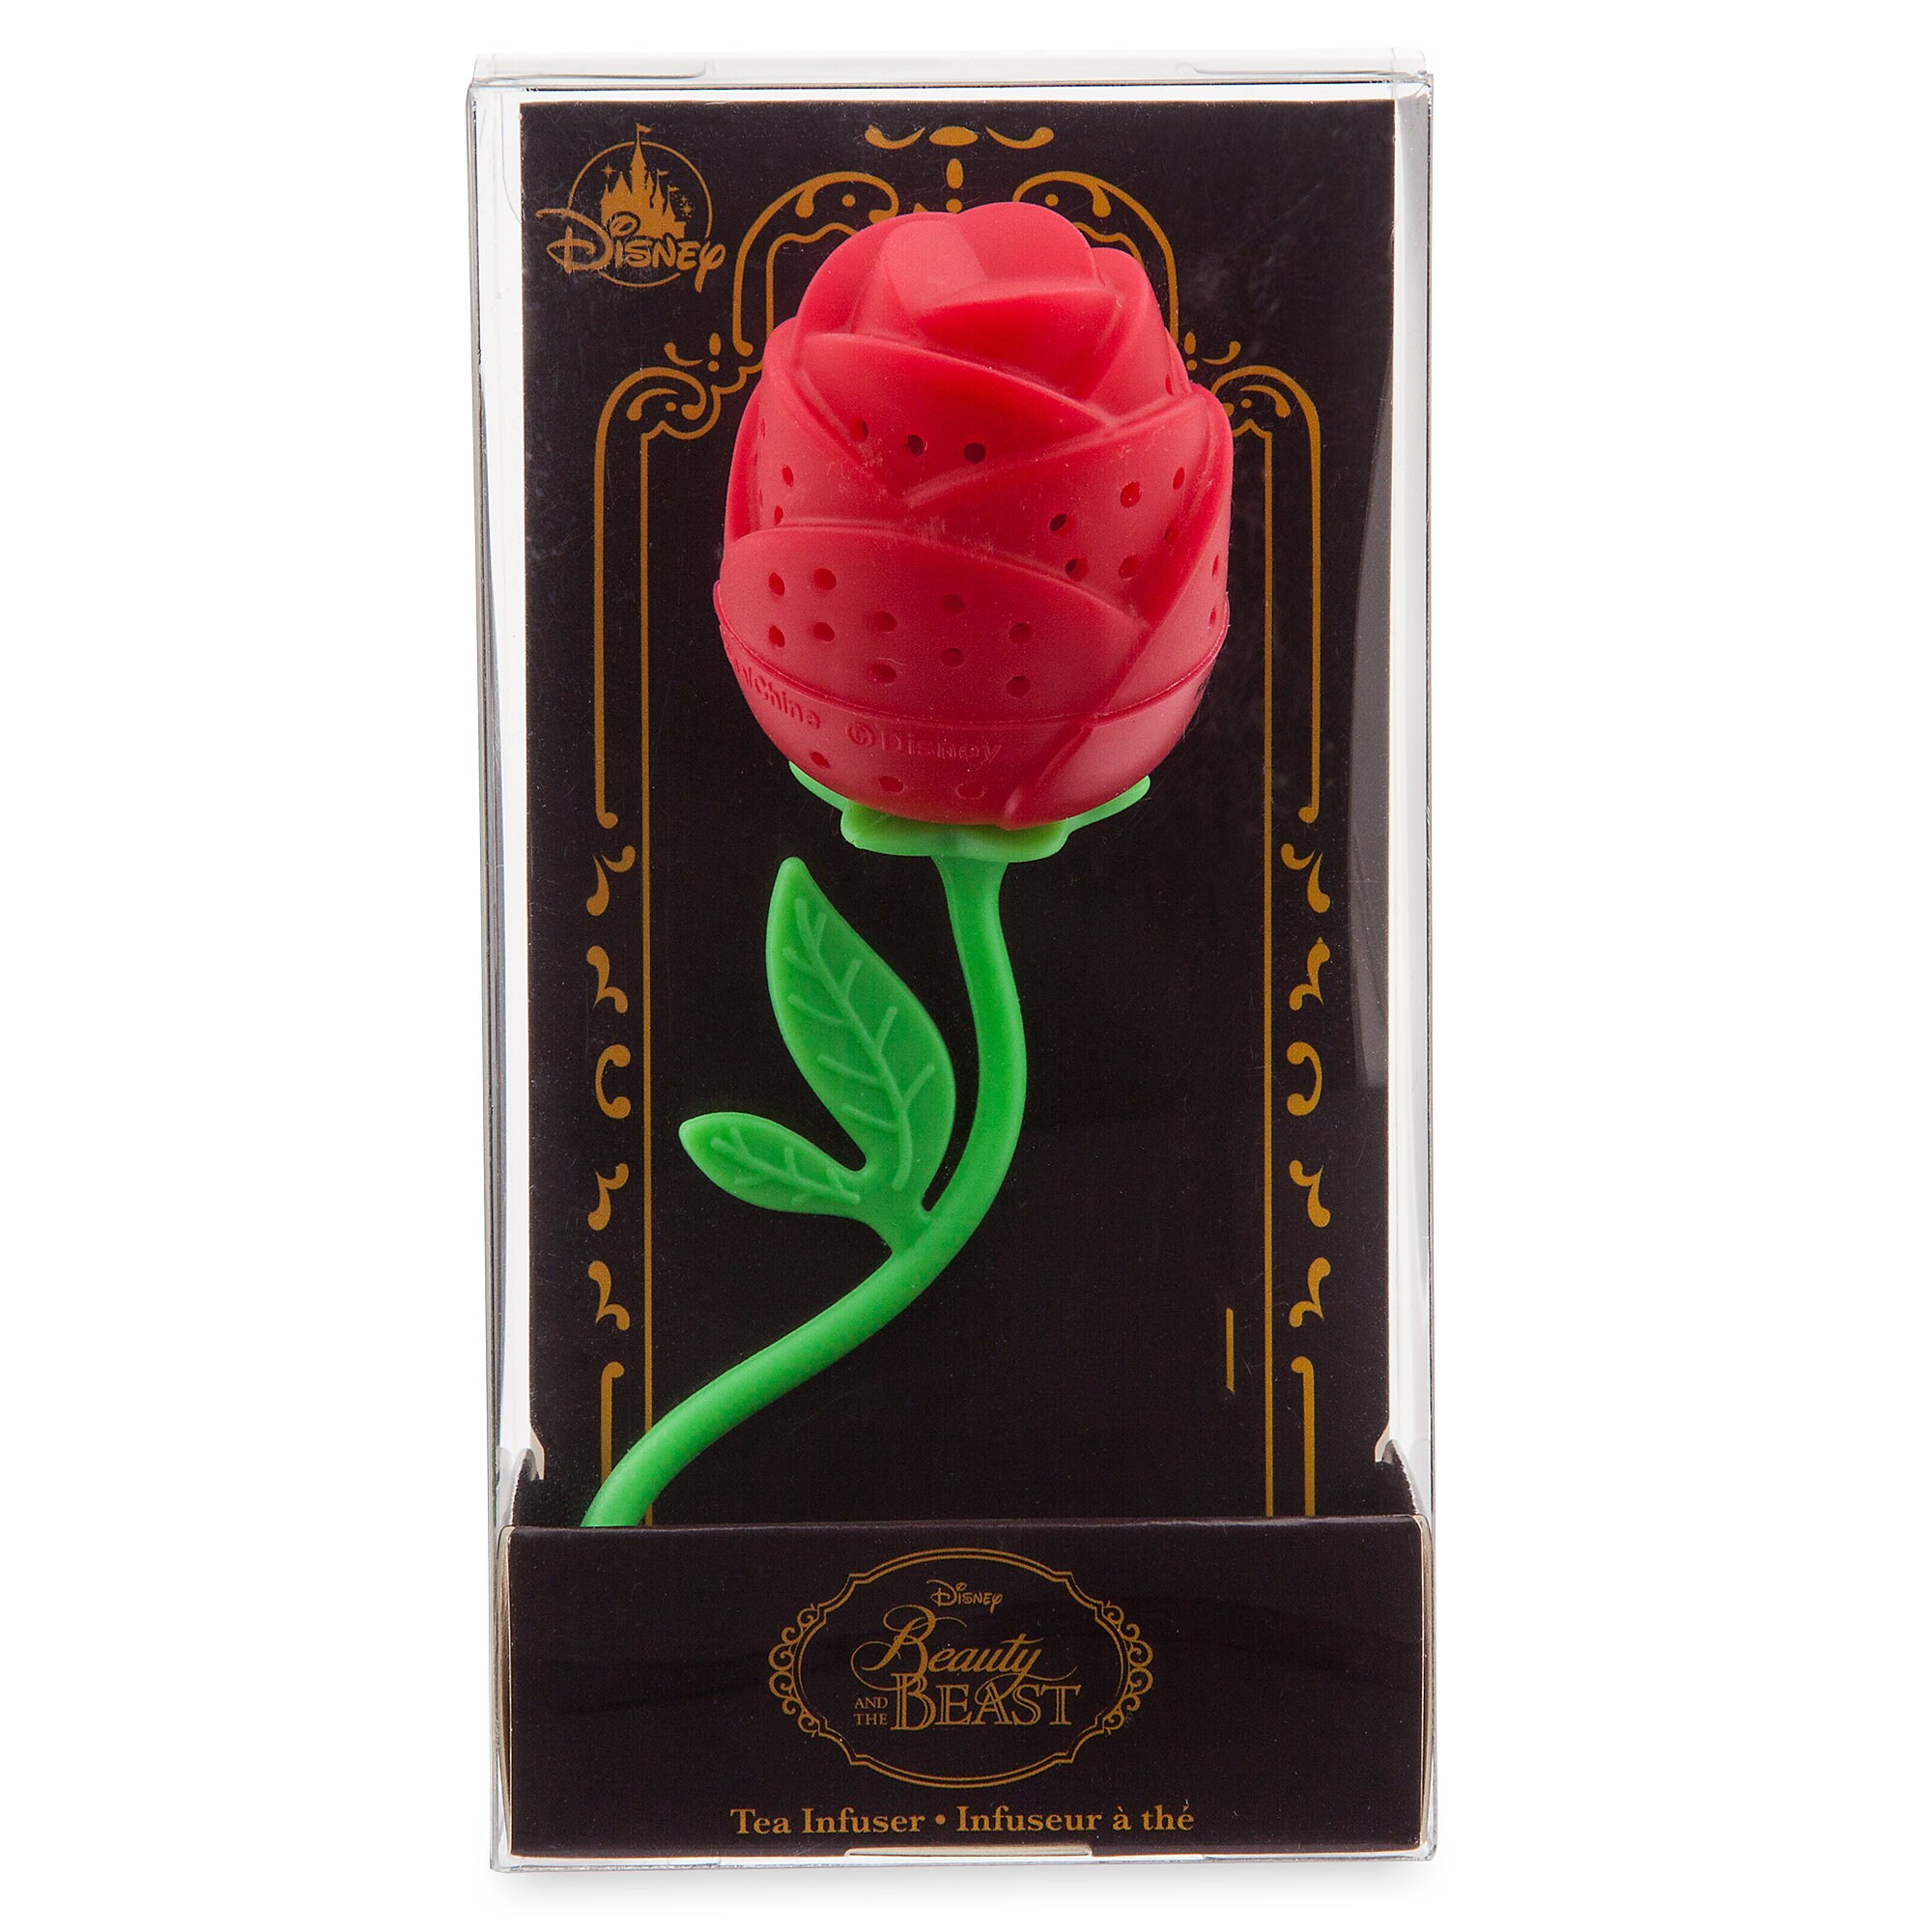 Enchanted Rose Tea Infuser - Beauty and the Beast